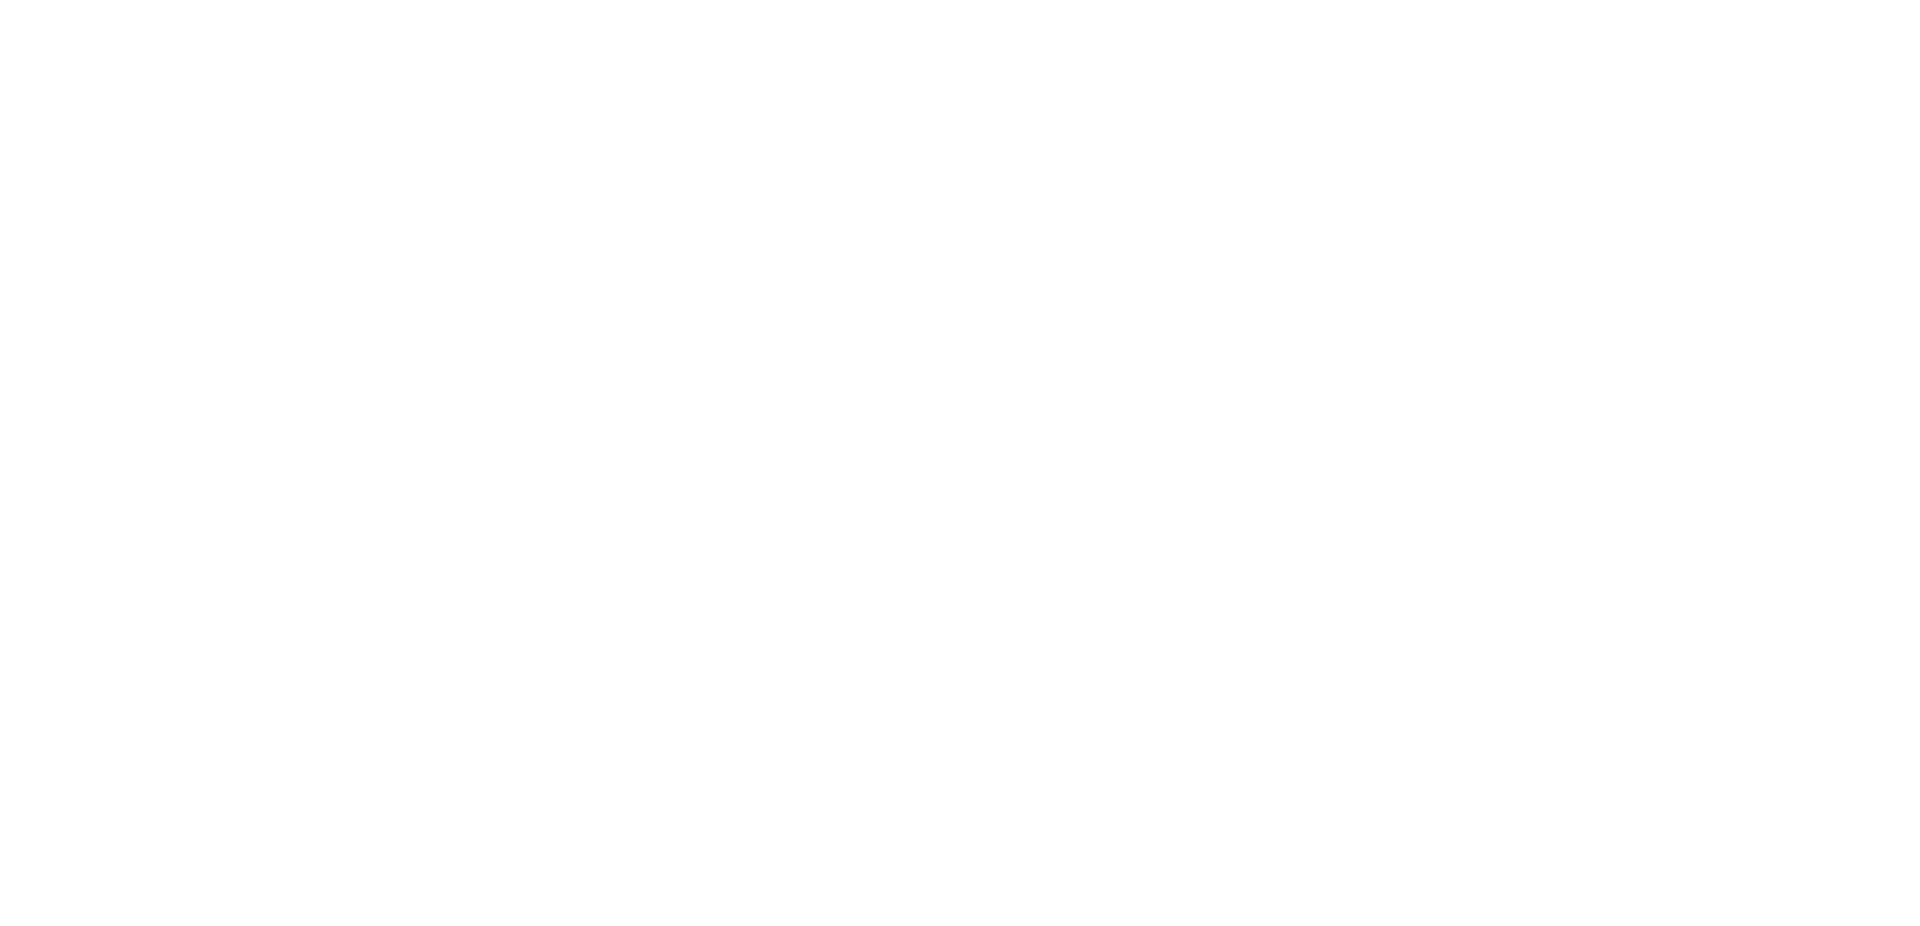 Buying and Selling Homes